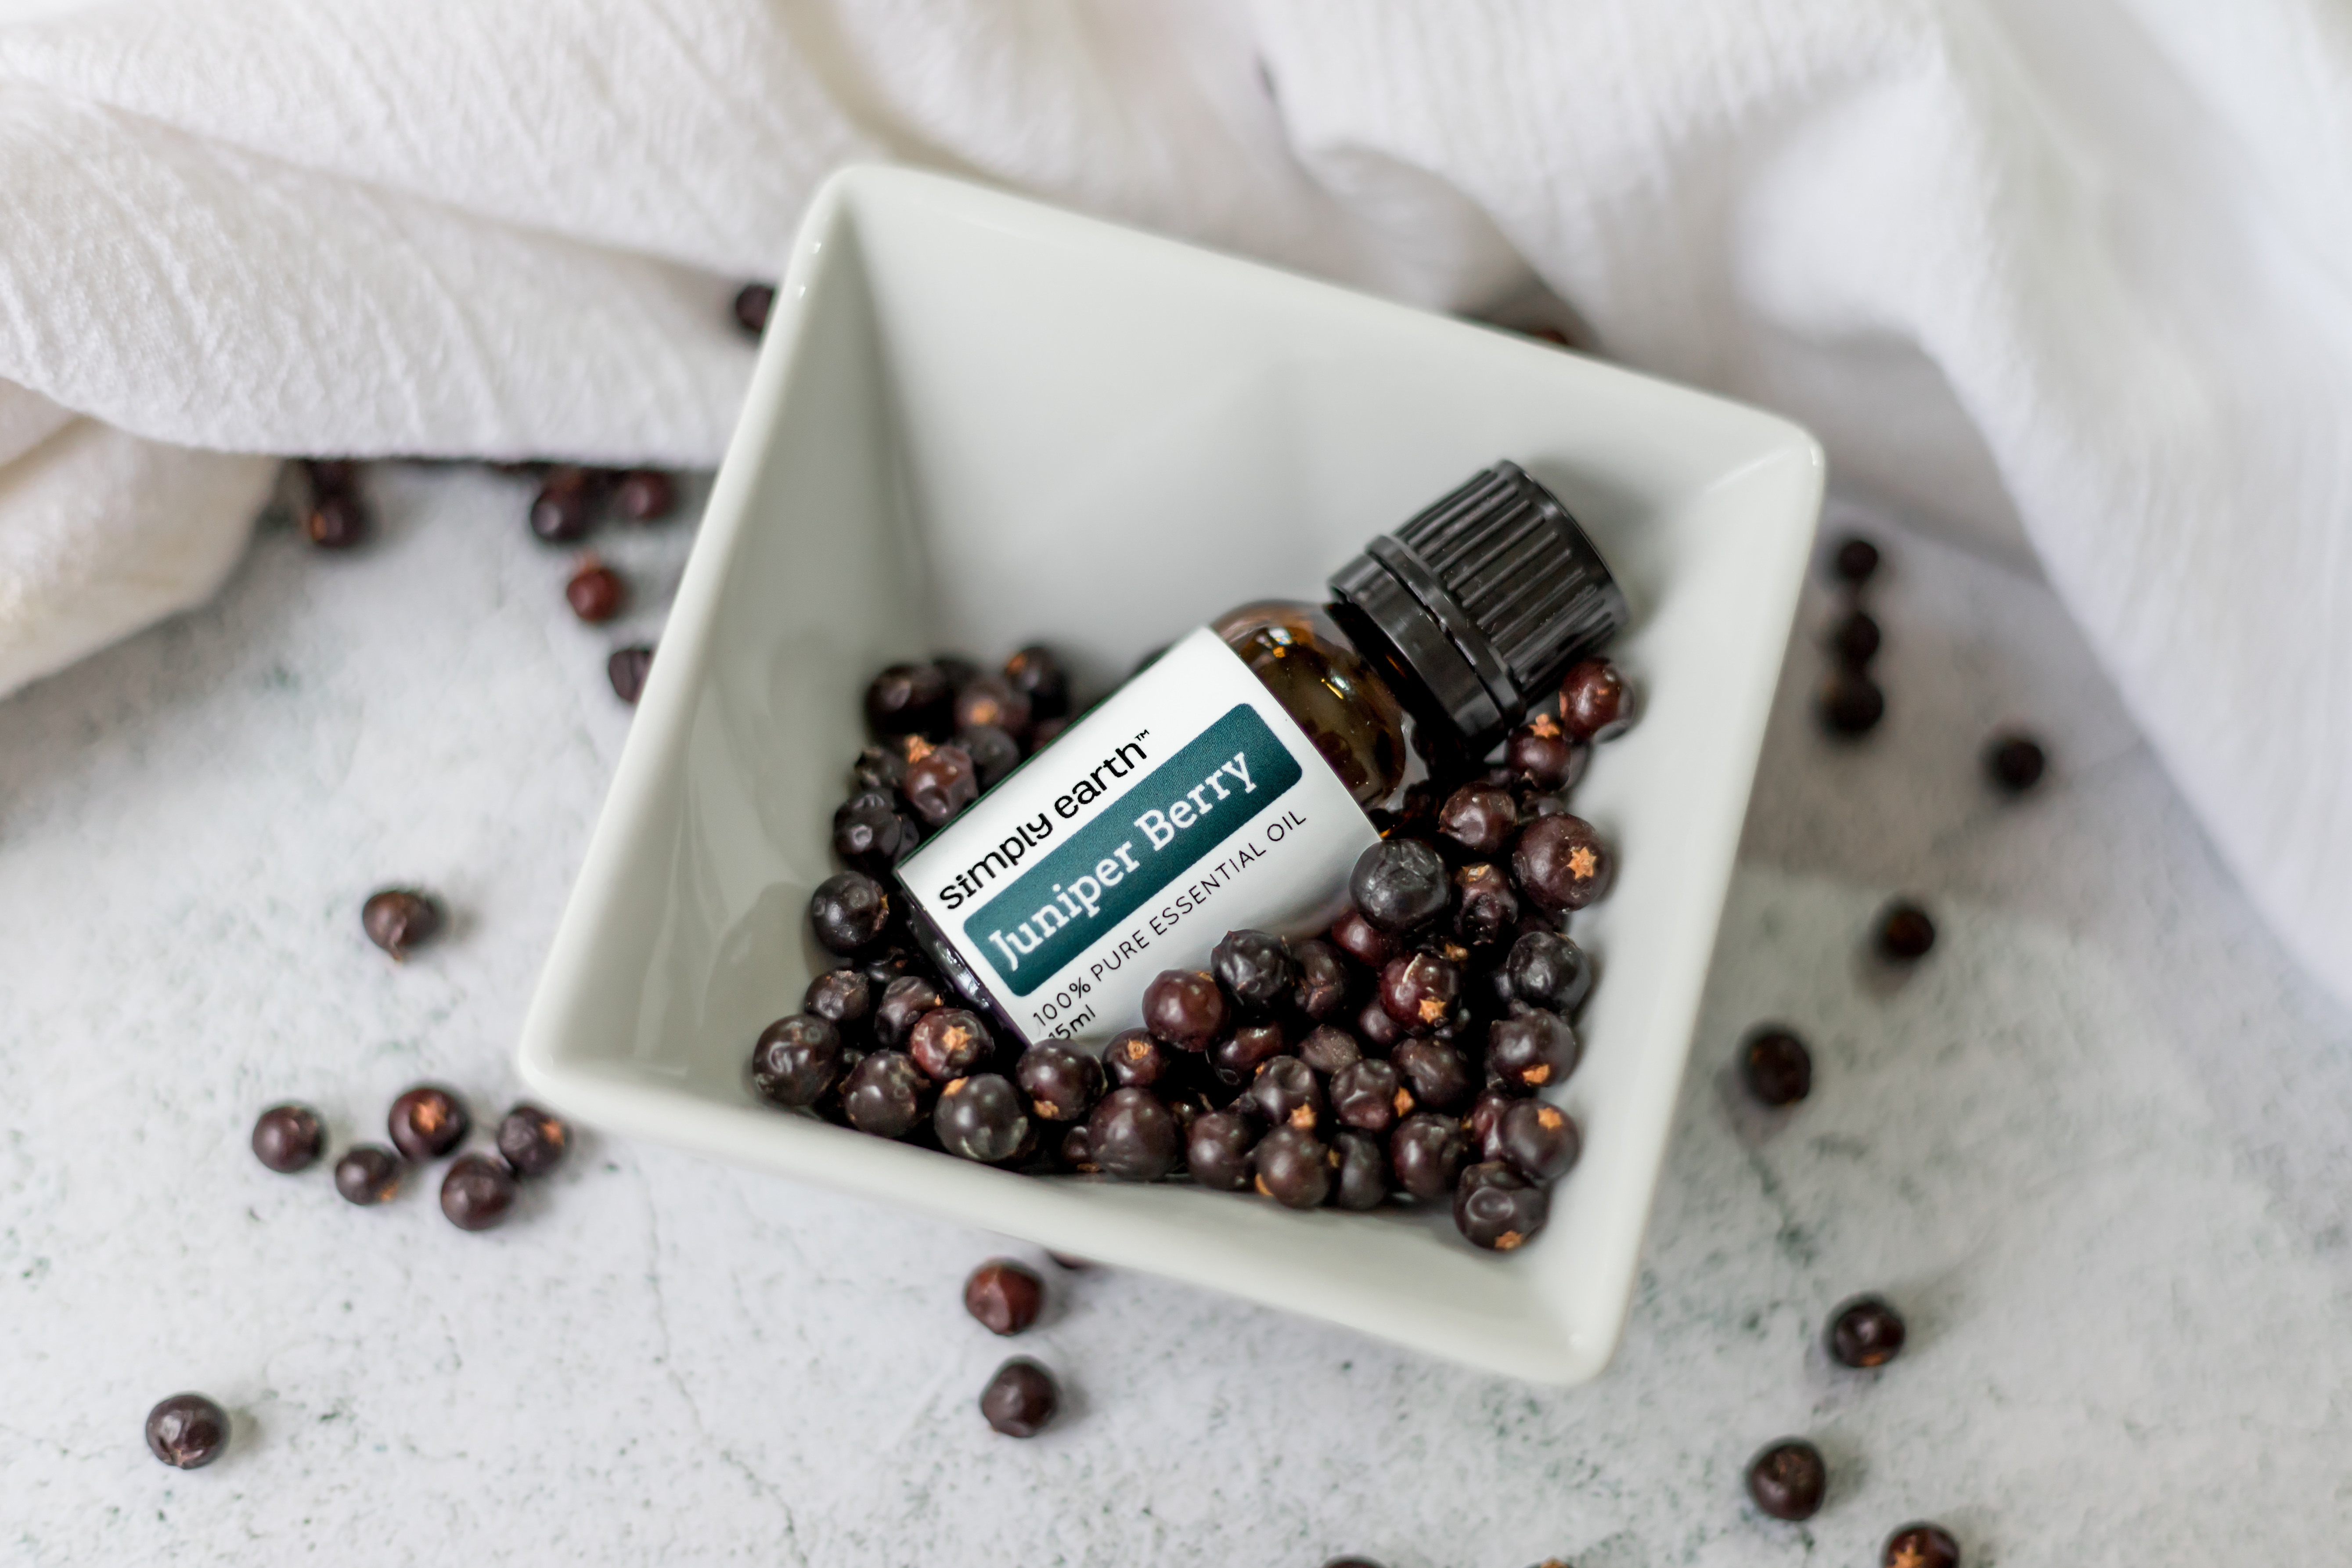 Frankincense Essential Oil Benefits, Uses, and Recipes - Simply Earth Blog